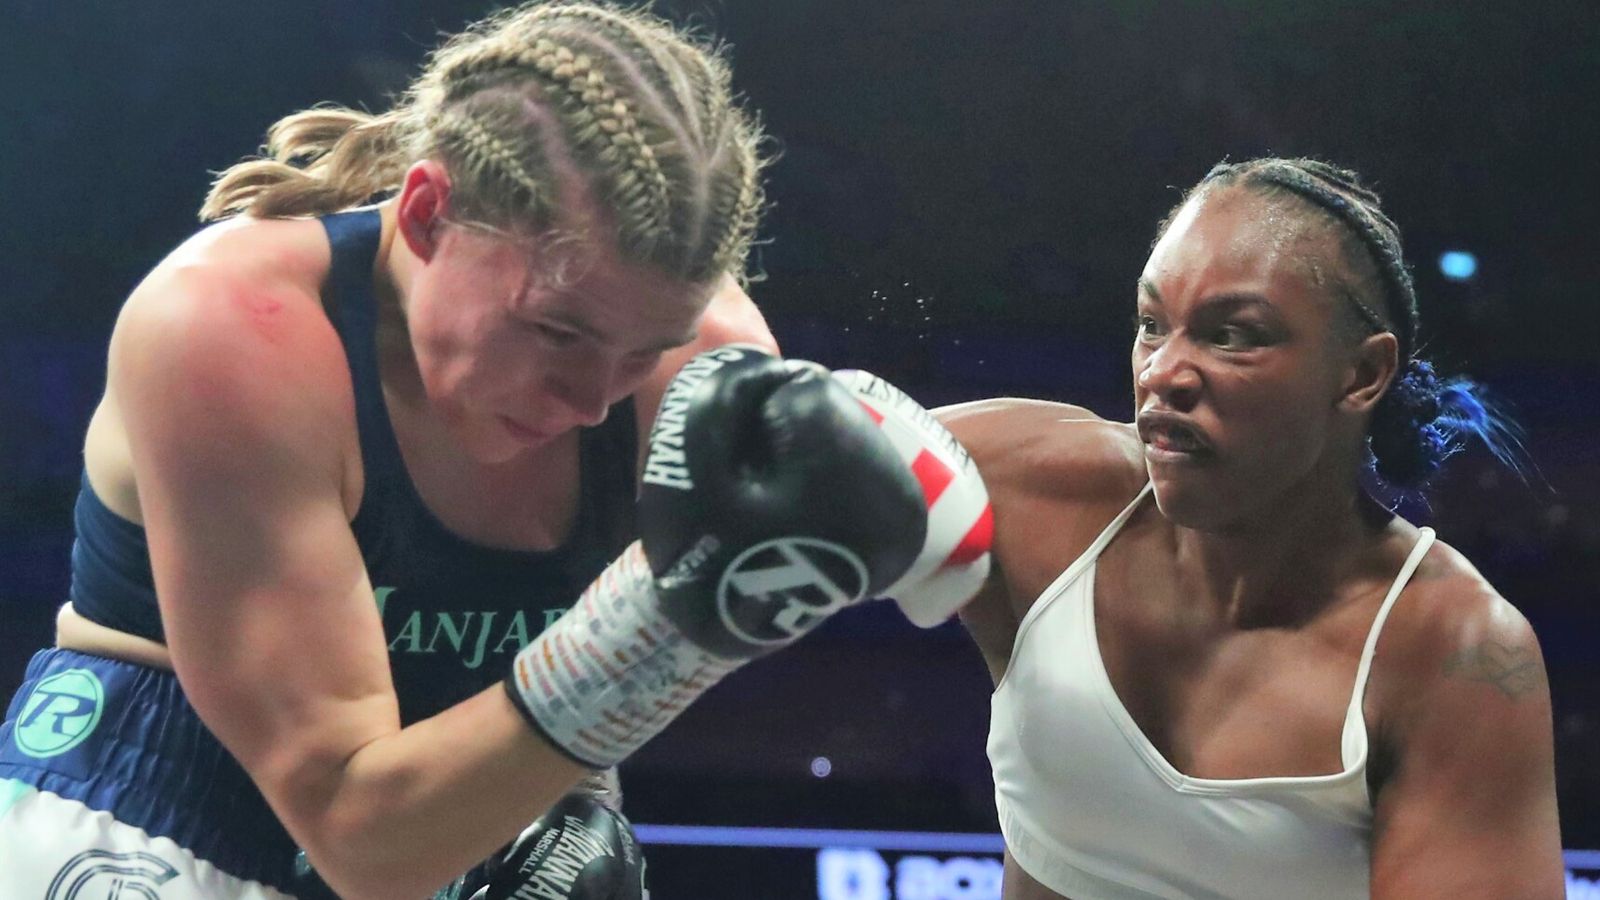 claressa-shields-beats-savannah-marshall-by-unanimous-decision-in-undisputed-middleweight-title-fight